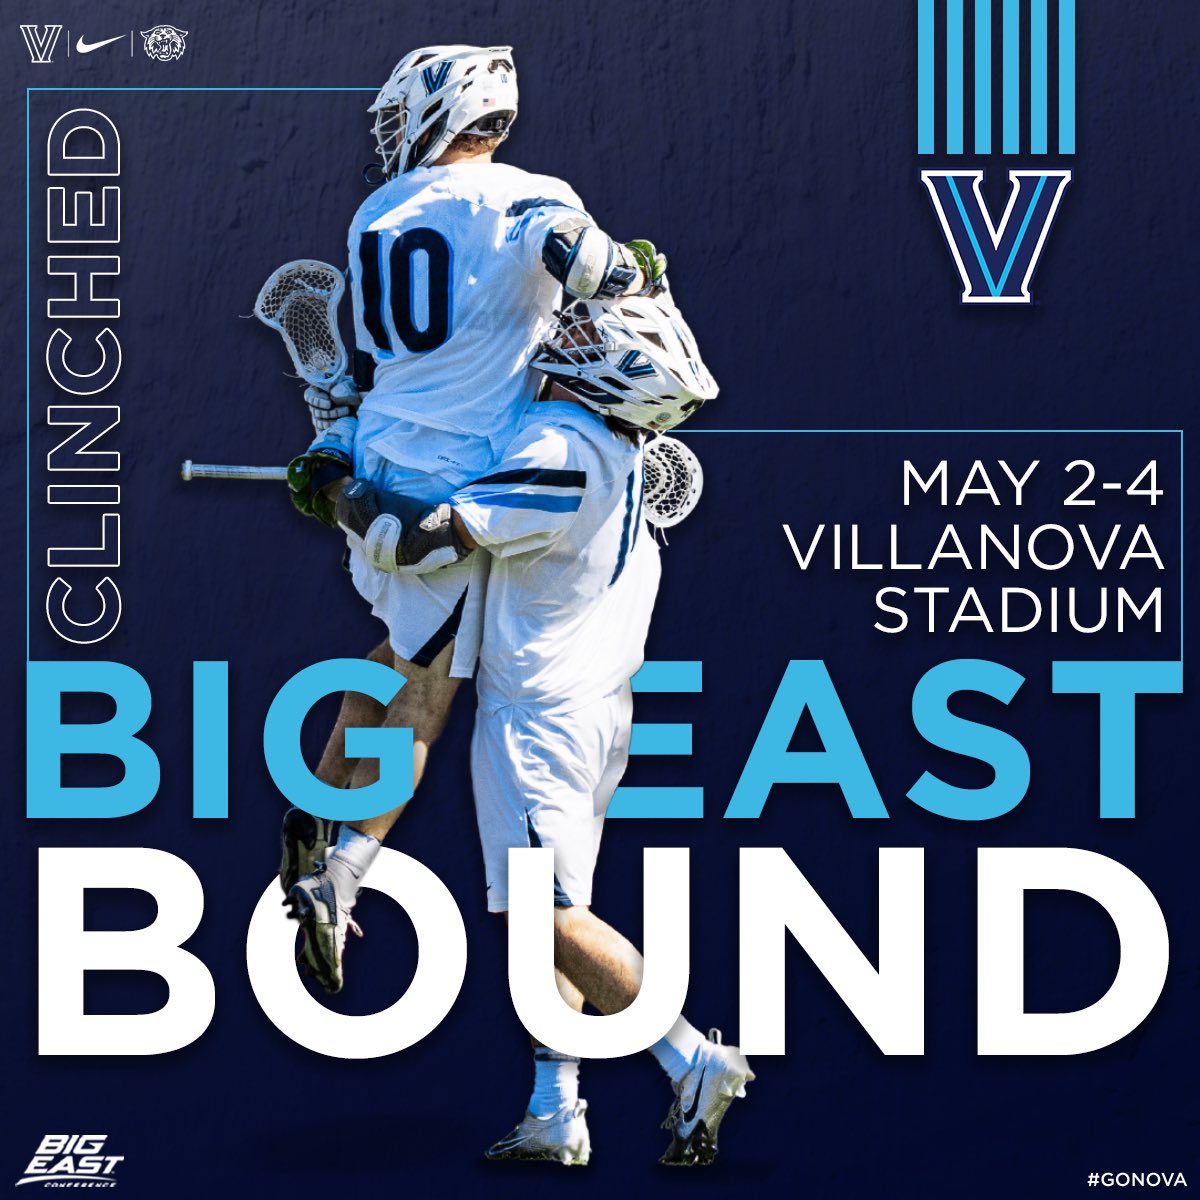 𝐖𝐄'𝐑𝐄 𝐈𝐍... 𝑨𝑮𝑨𝑰𝑵 For the 12th consecutive year, your Wildcats are headed to the @BIGEAST Tournament 😼 Villanova has qualified for every Big East Lacrosse Tournament since its inception in 2012‼️ #NovaLax #GoNova✌️